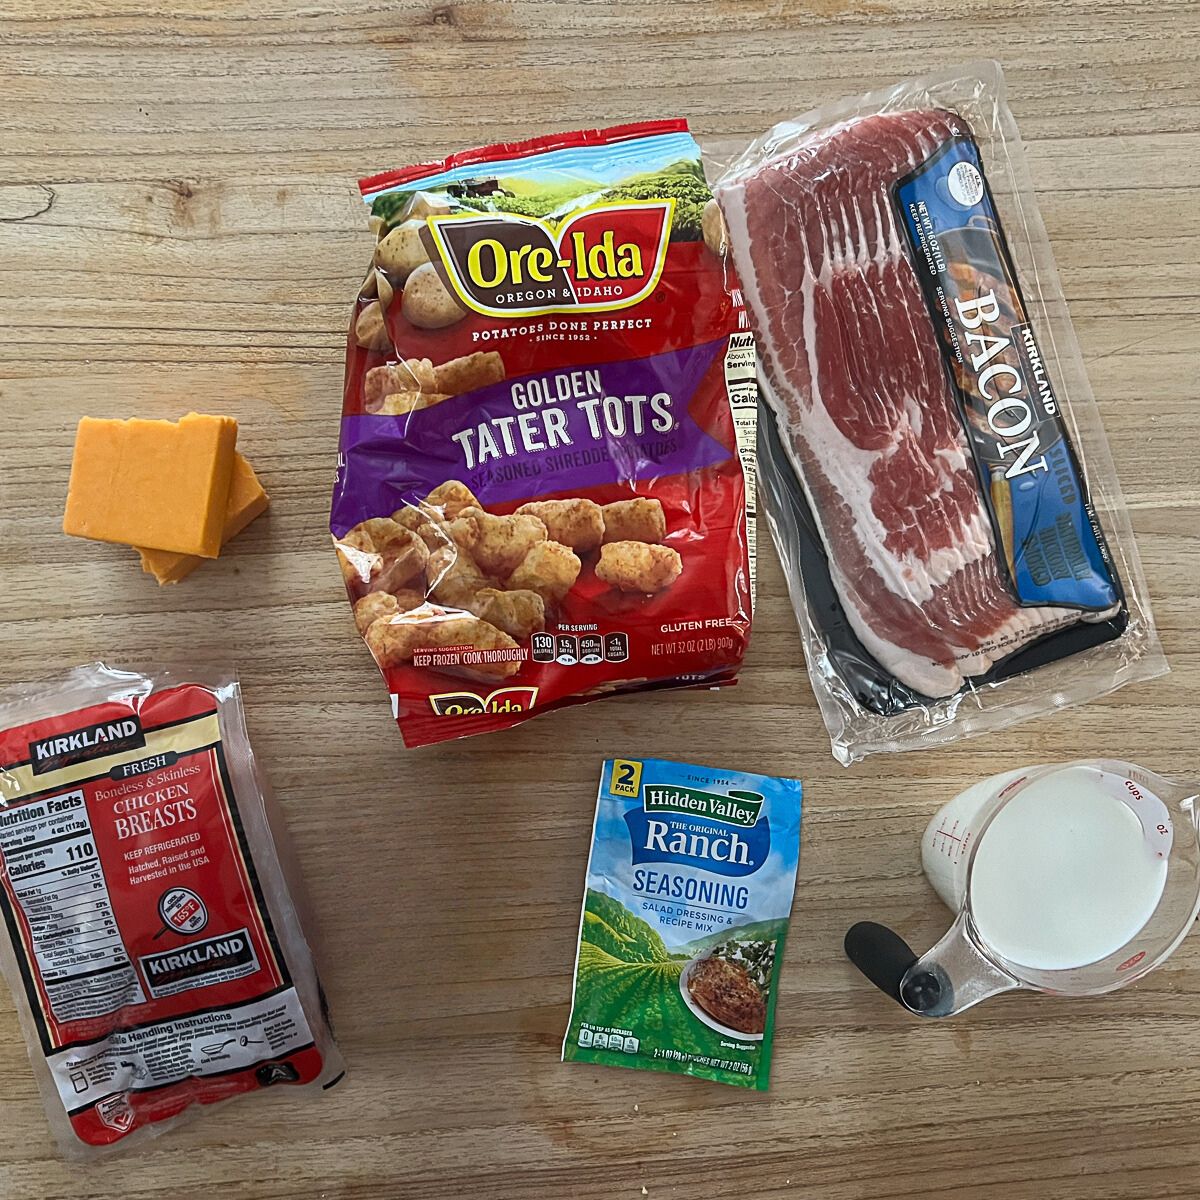 Ingredients for Chicken Bacon Ranch Tatertot Casserole - chicken, ranch seasoning, milk, cheddar cheese, Tater Tots, Bacon.